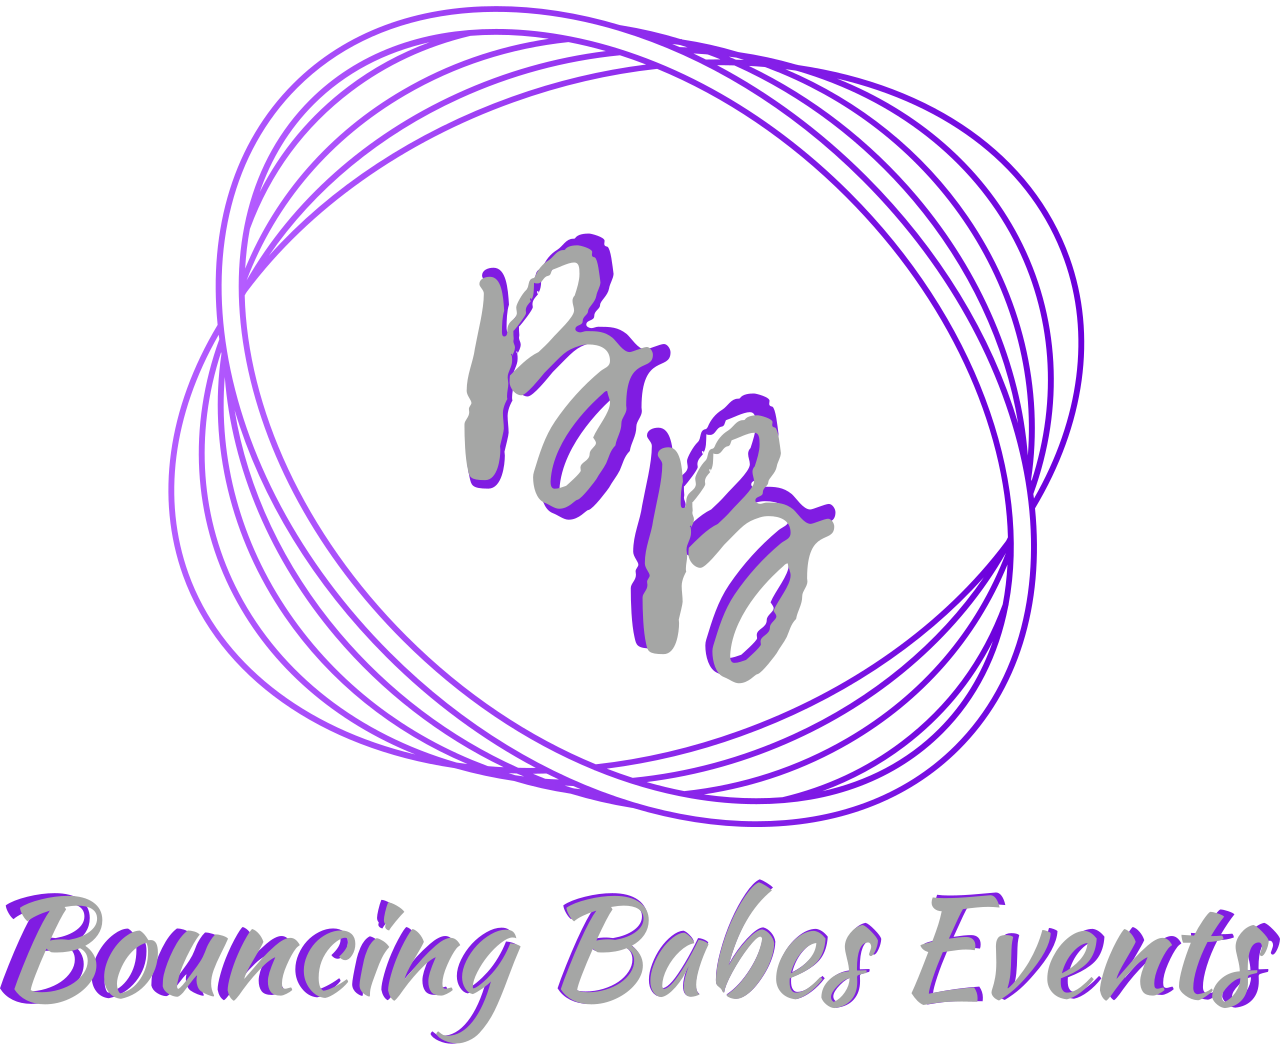 Bouncing Babes Events's logo